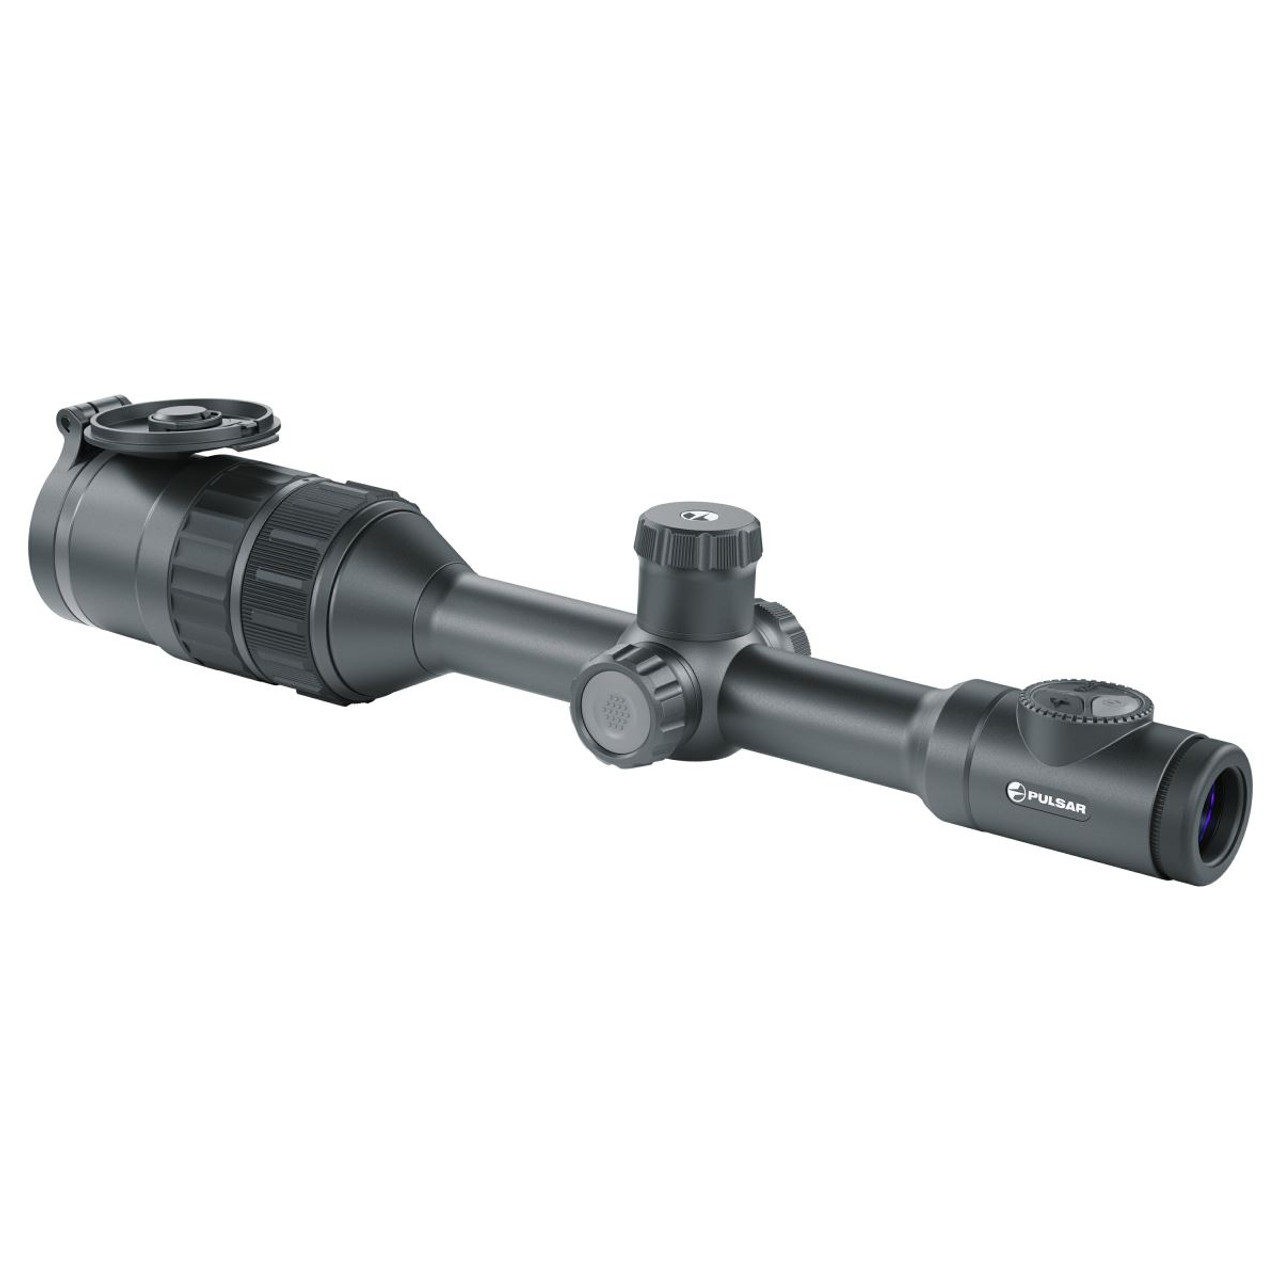 Pulsar Digex C50 Day Night Vision Scope Without Wi-Fi or Illuminator